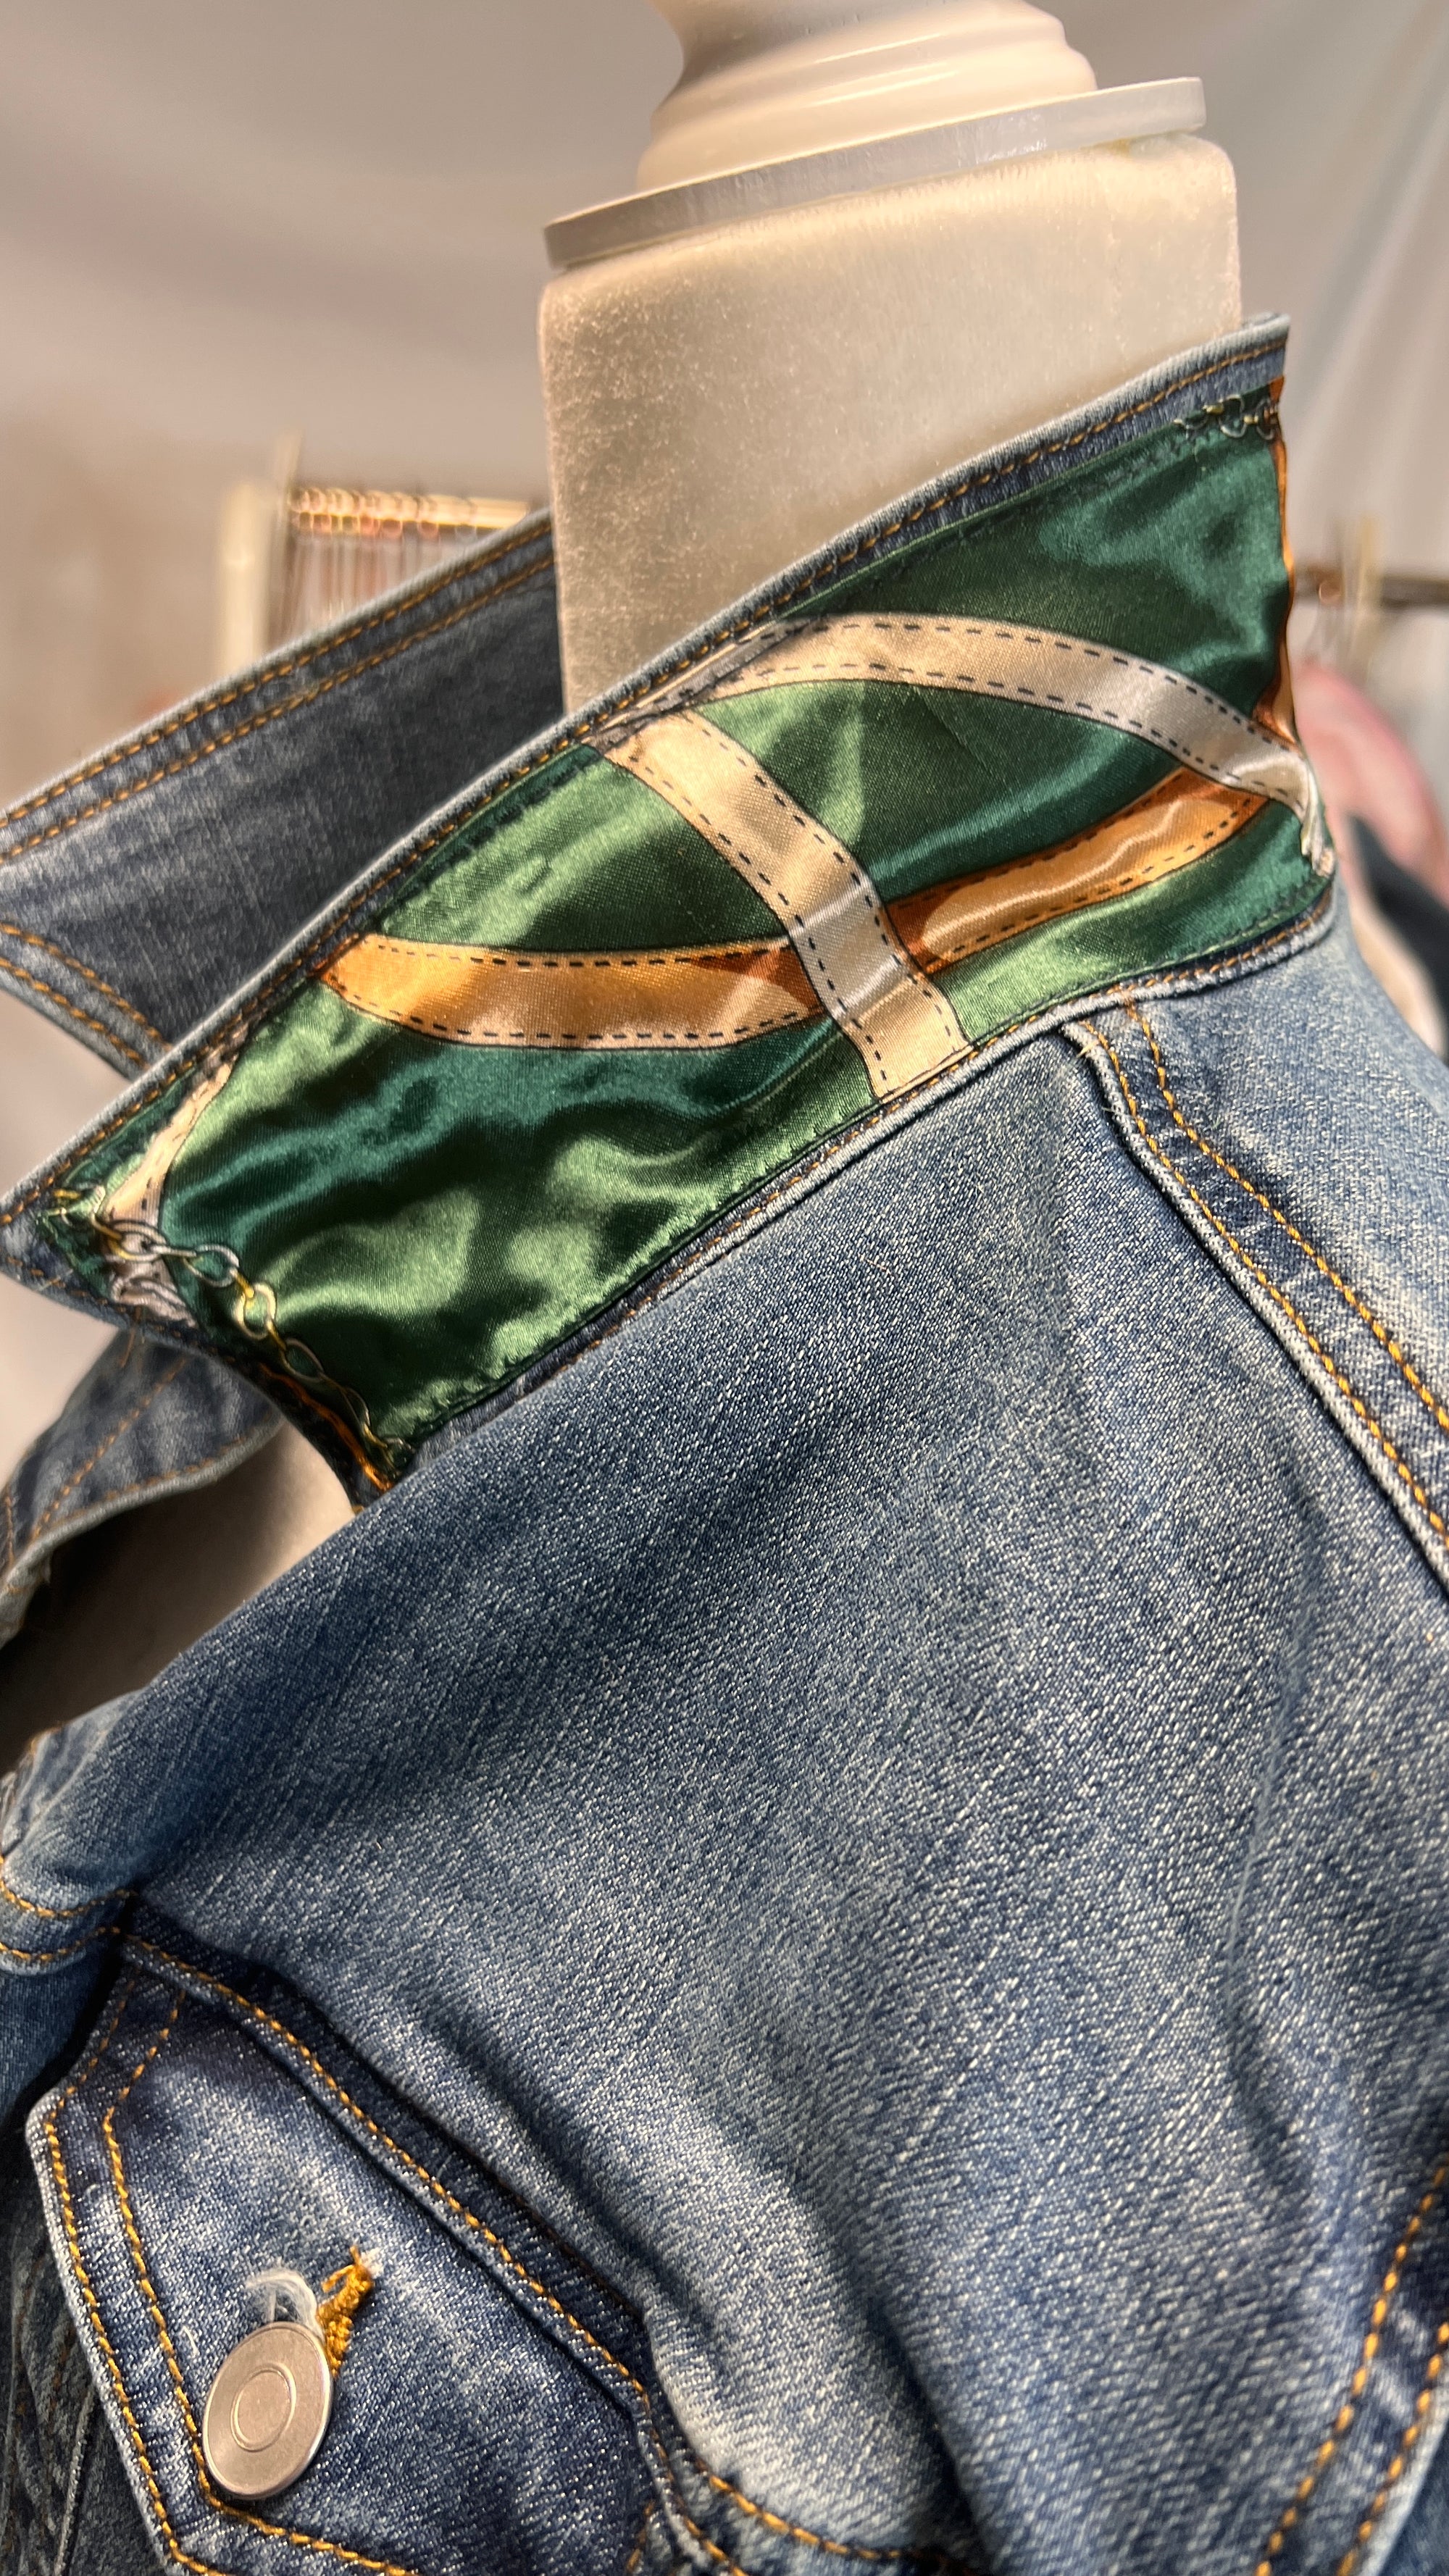 Green Bridles and Bits Scarf on Denim Jacket